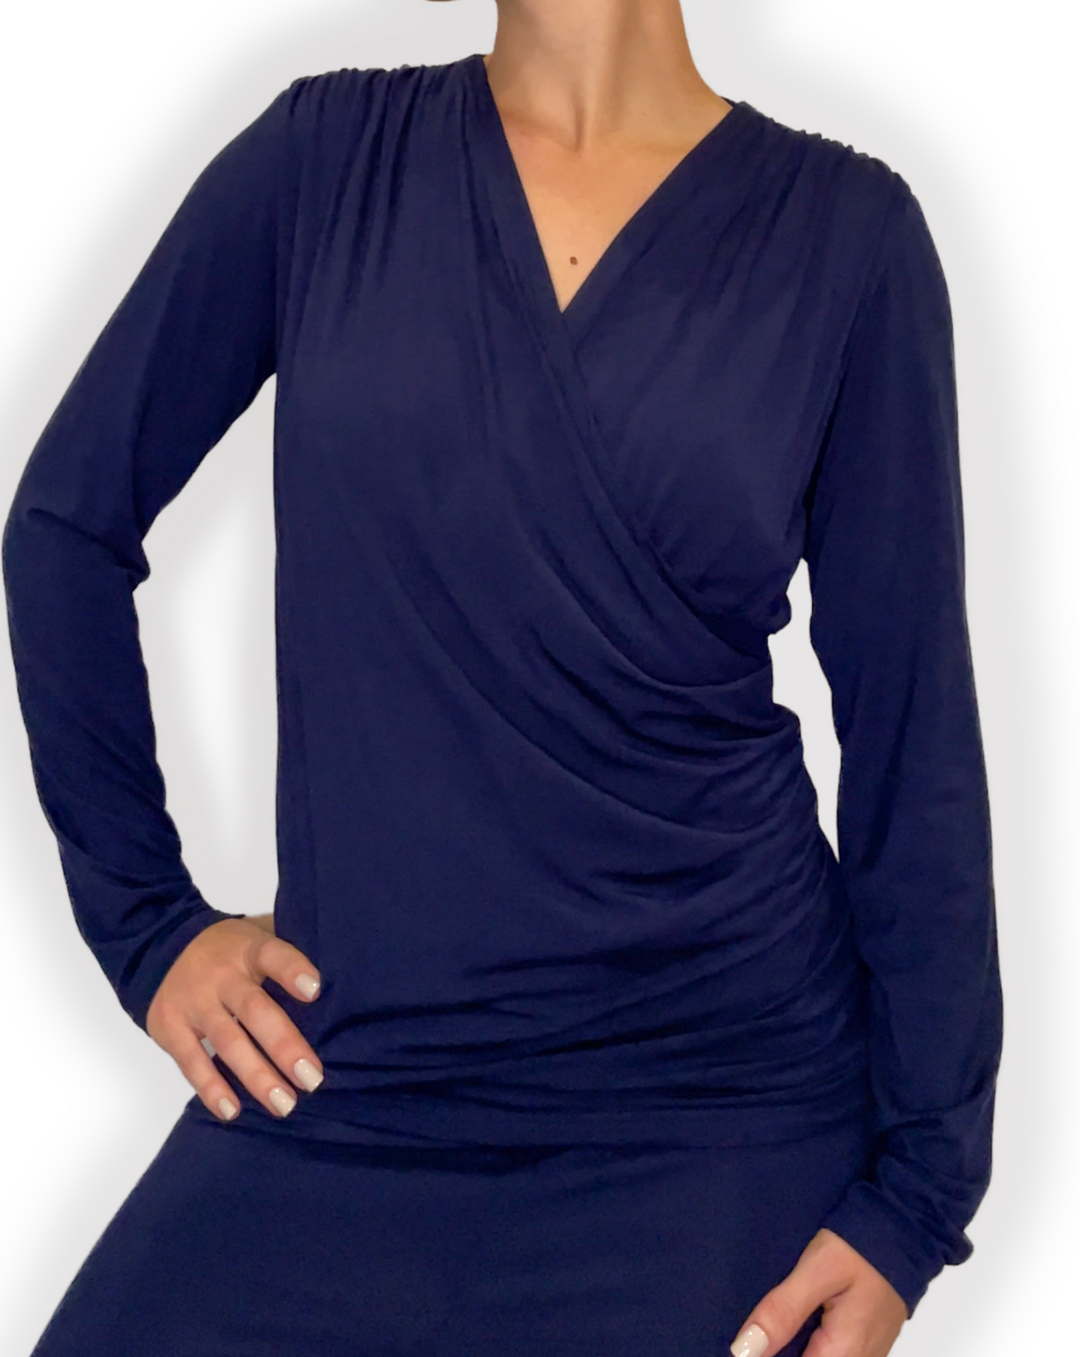 jia and kate ROSIE Braless Bamboo Wrap Top Long Sleeve in blue color